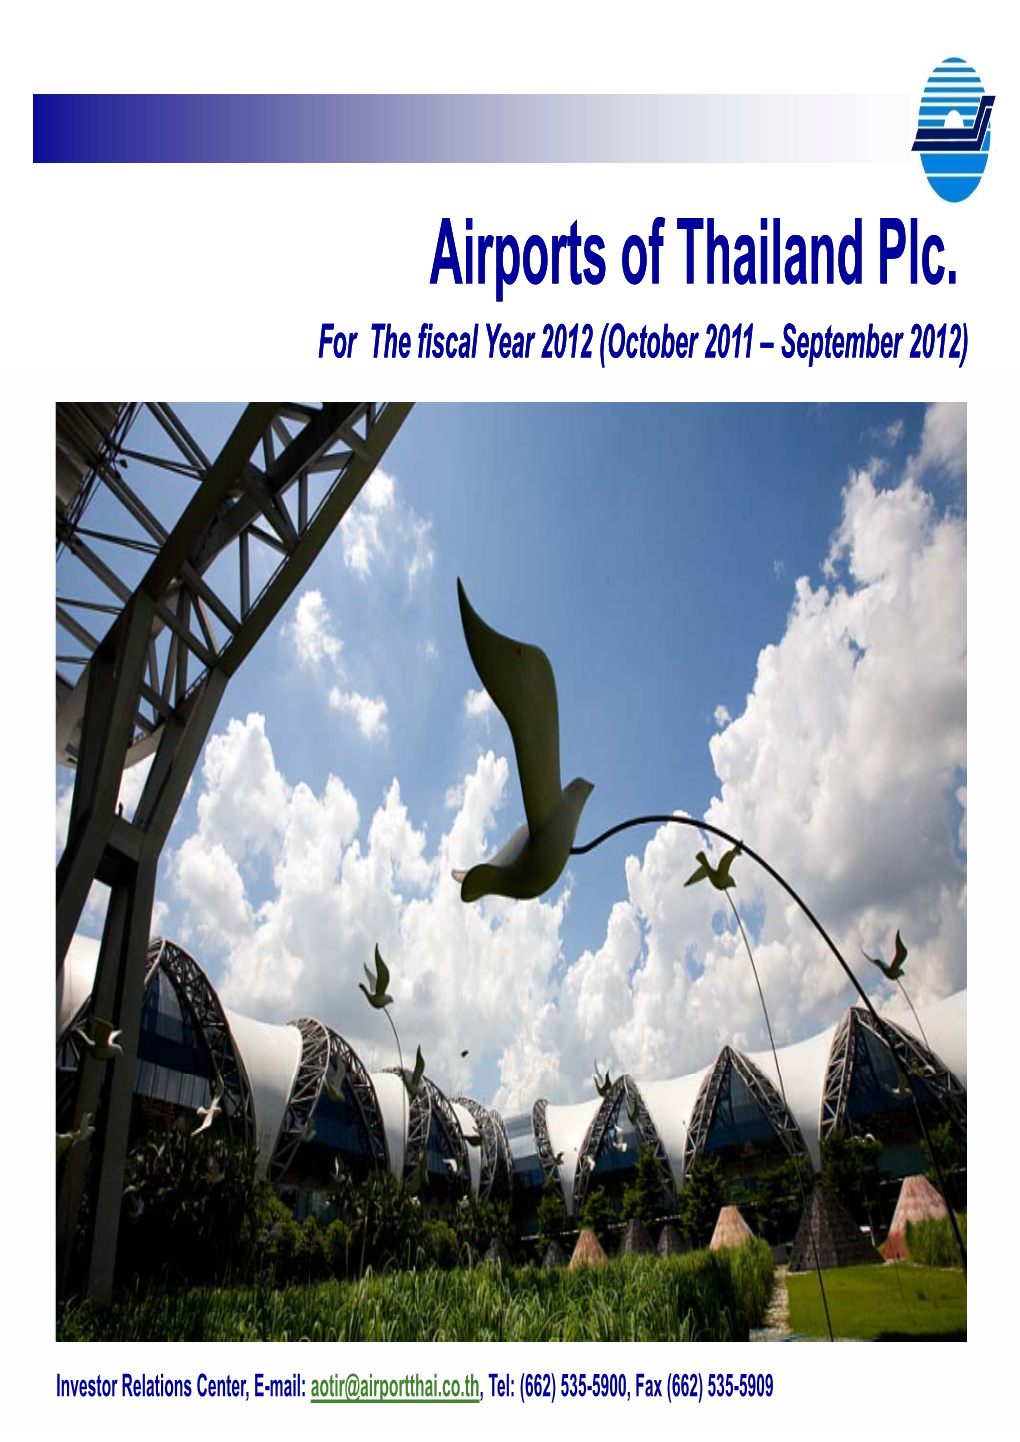 Airports of Thailand Plc. for the Fiscal Year 2012 (October 2011 – September 20122012))